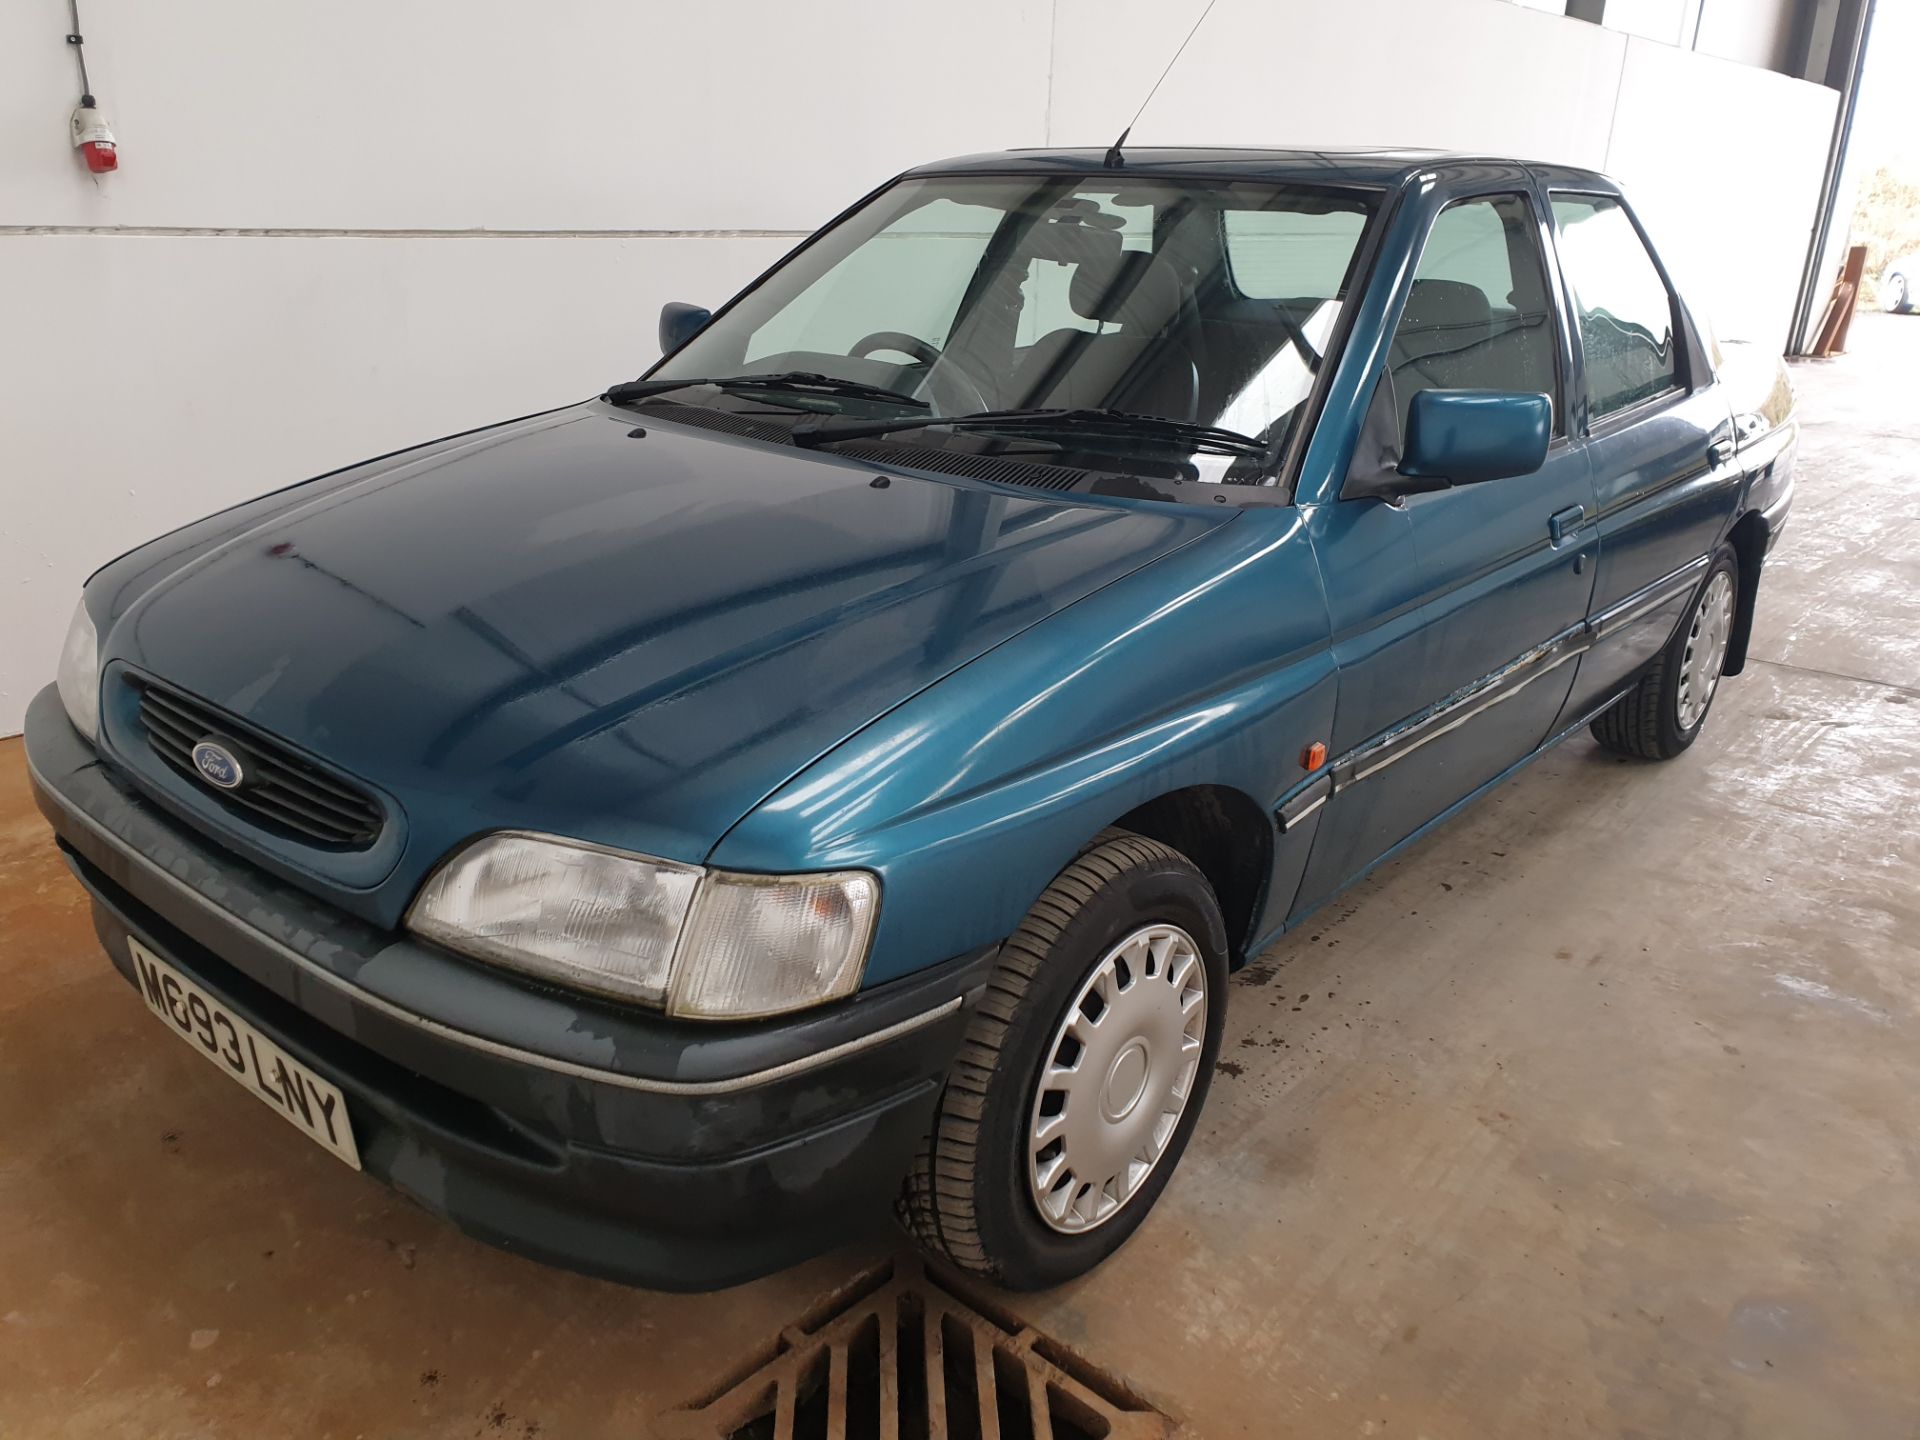 1995 / M Ford Escort LXi Saloon - Image 8 of 8